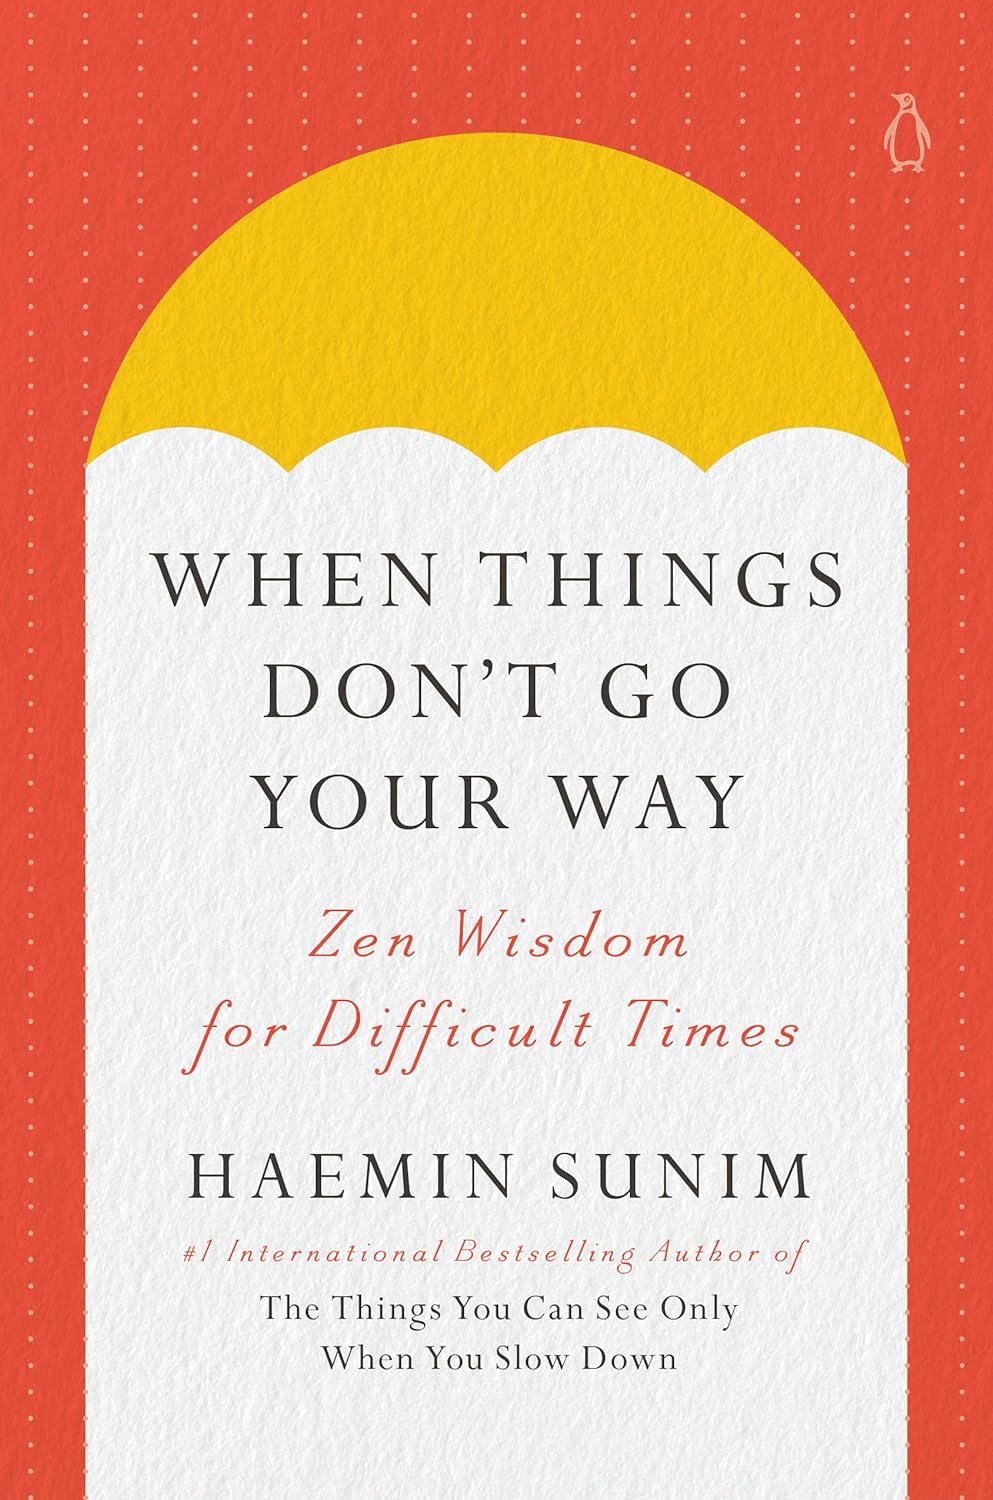 When Things Don’t Go Your Way | Haemin Sunim